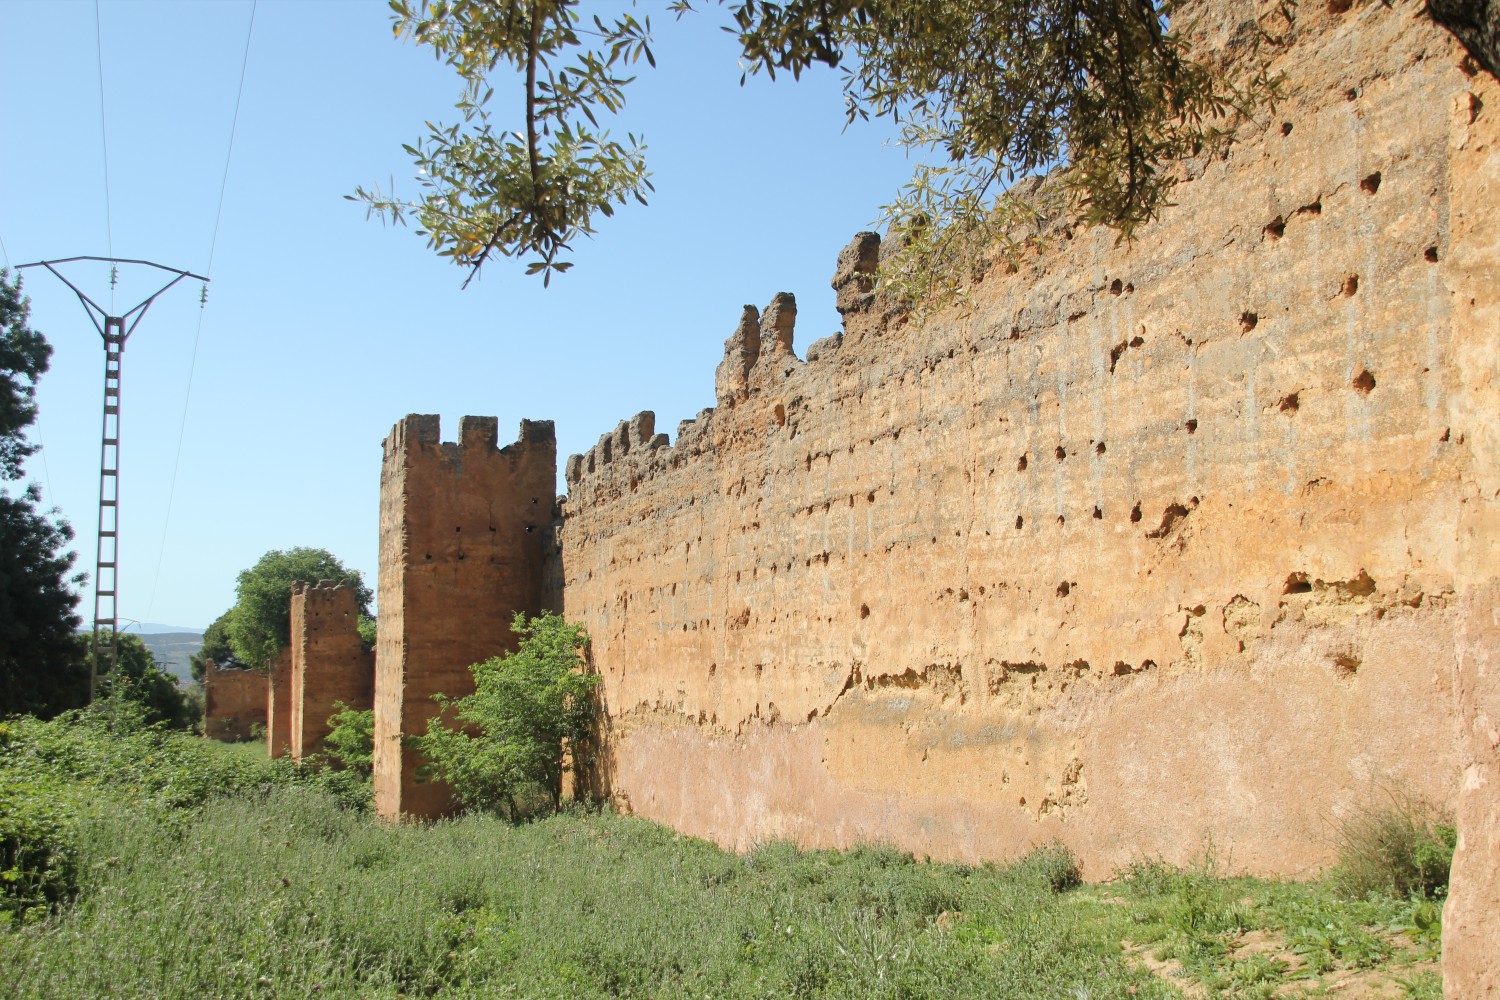 View of south-west walls showing square towers